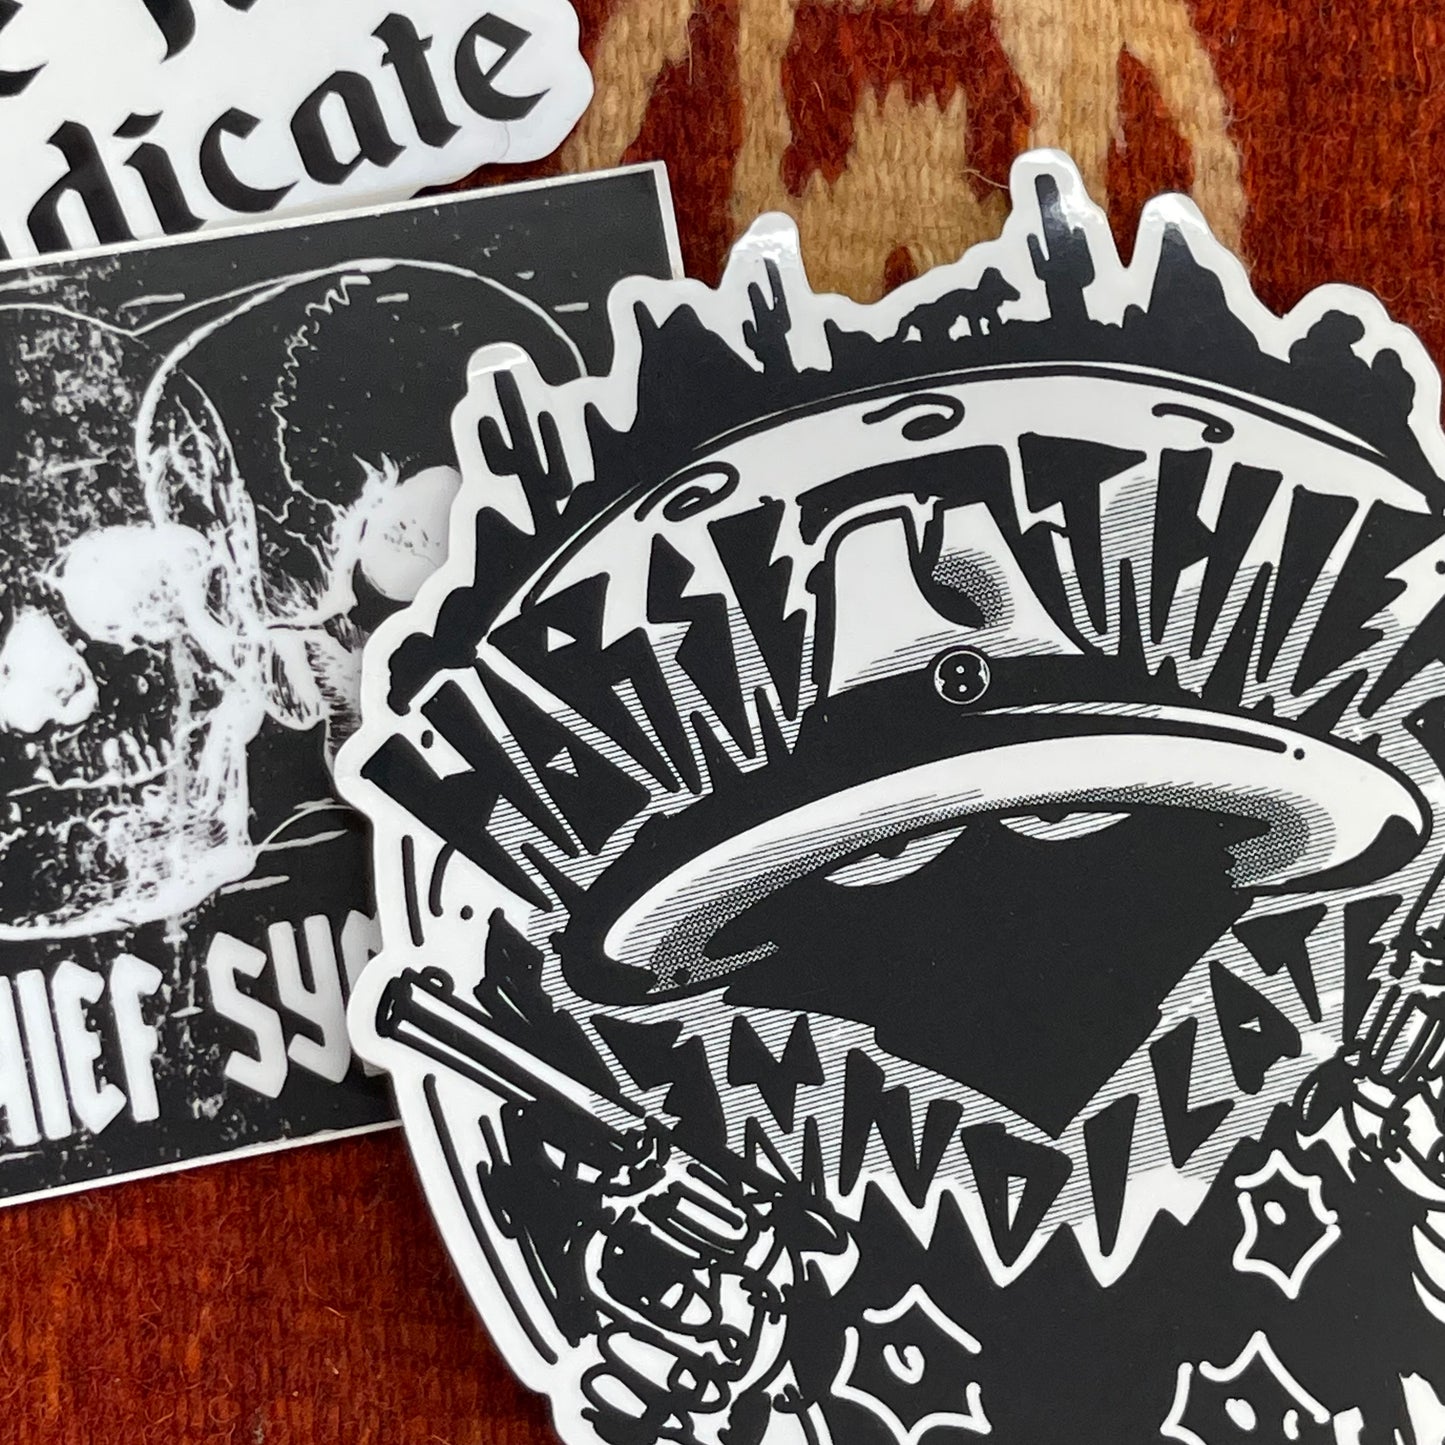 Horse Thief Syndicate Introduction sticker pack